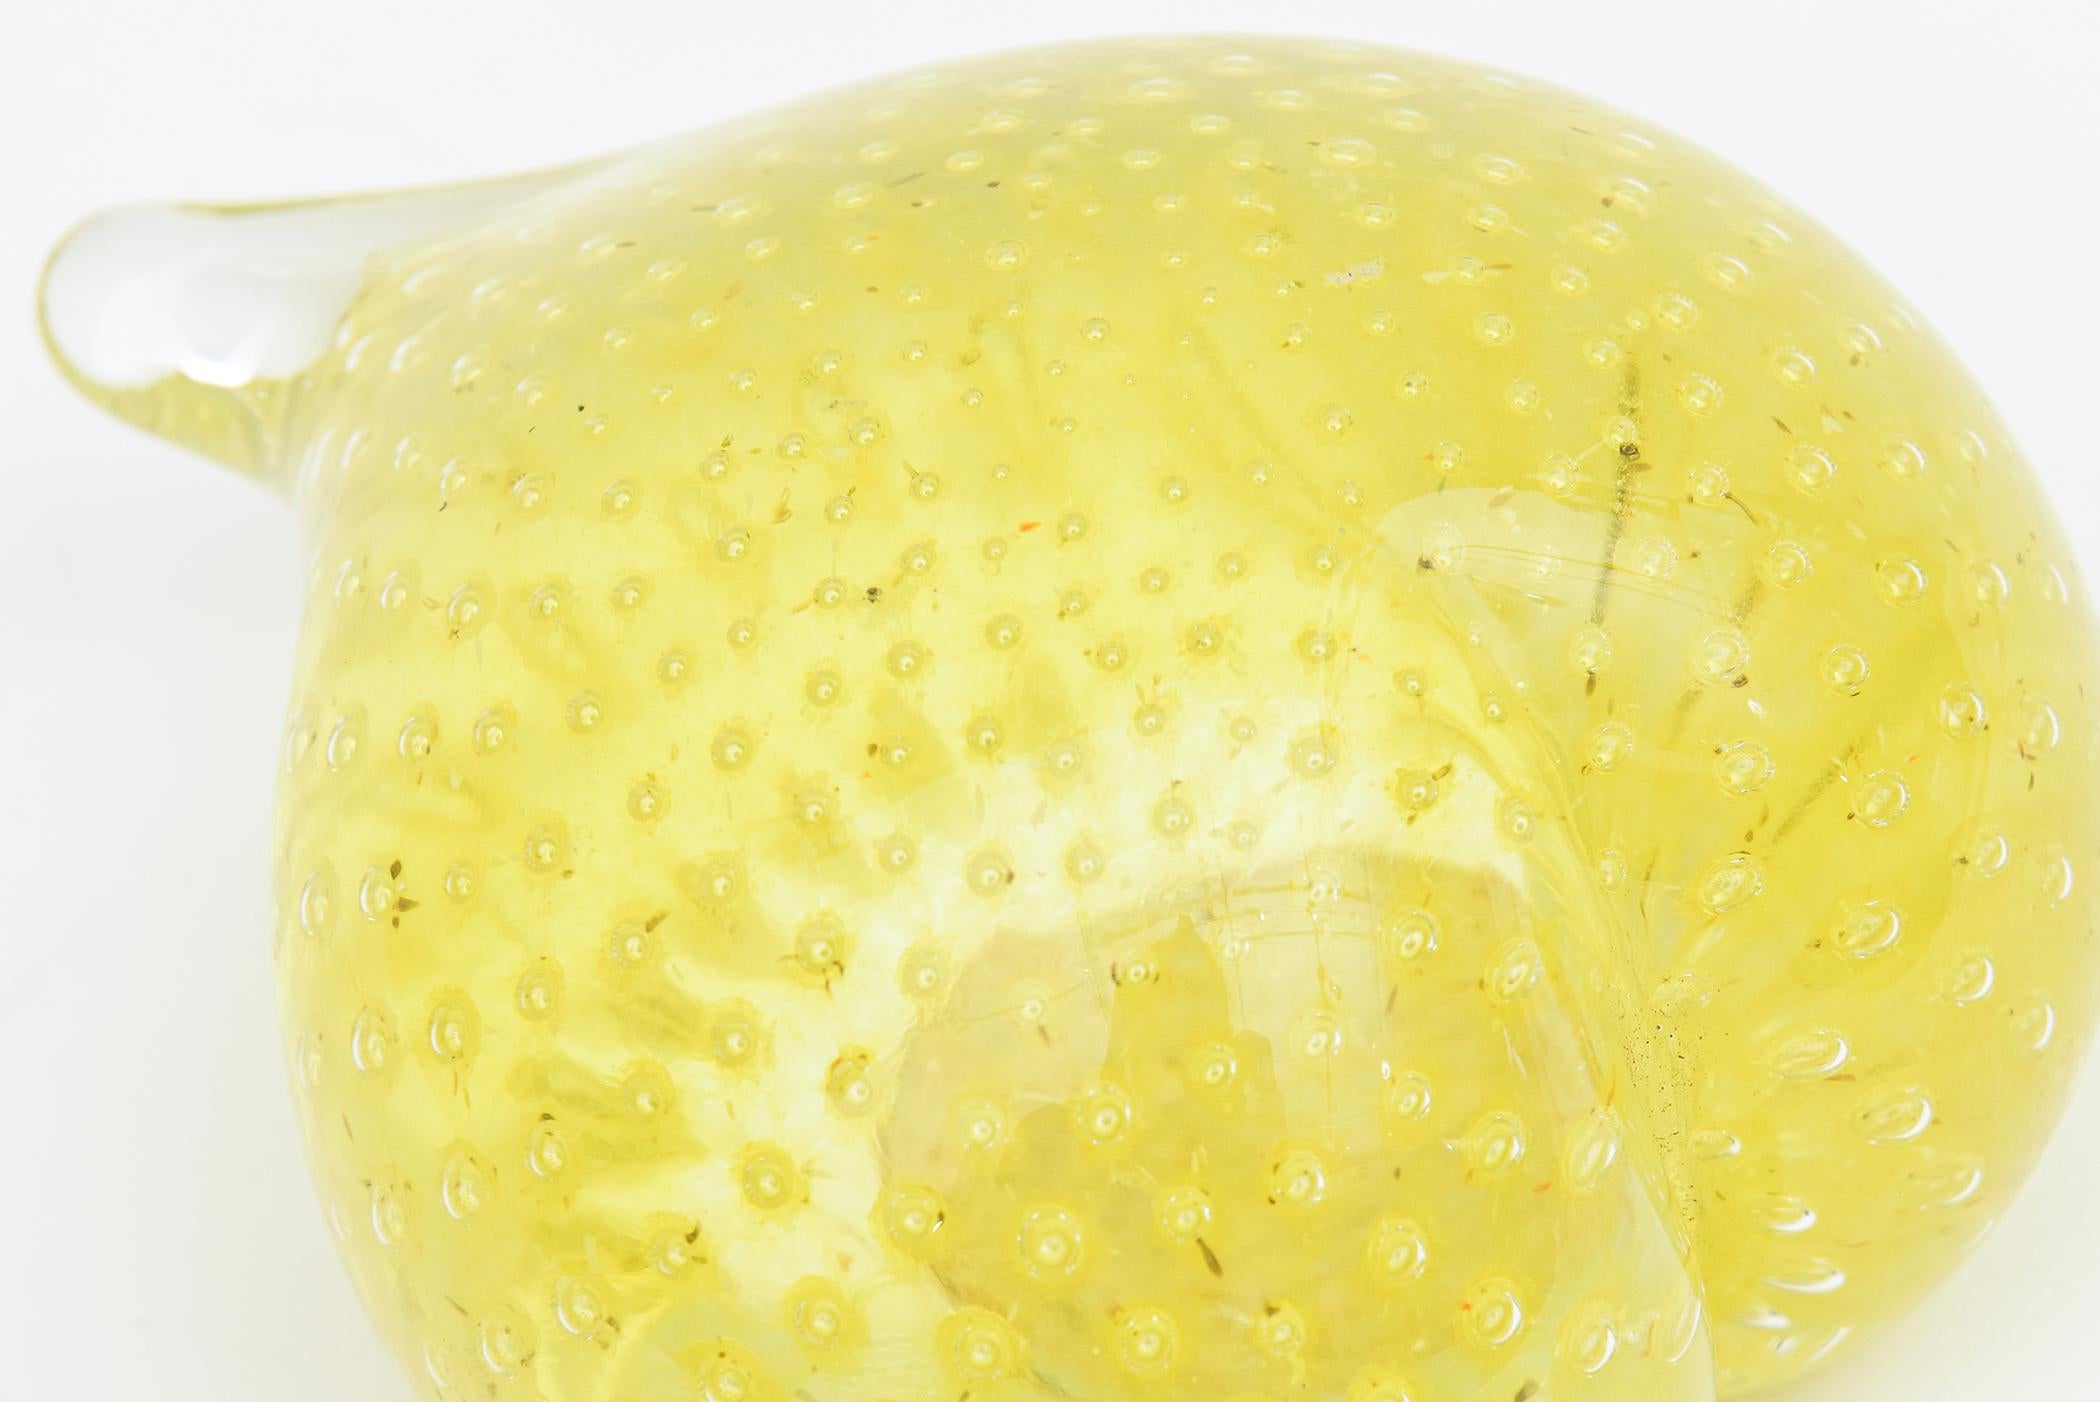 Mid-20th Century Murano Vintage Yellow Heart Glass With Bubbles Paperweight Desk Accessory For Sale